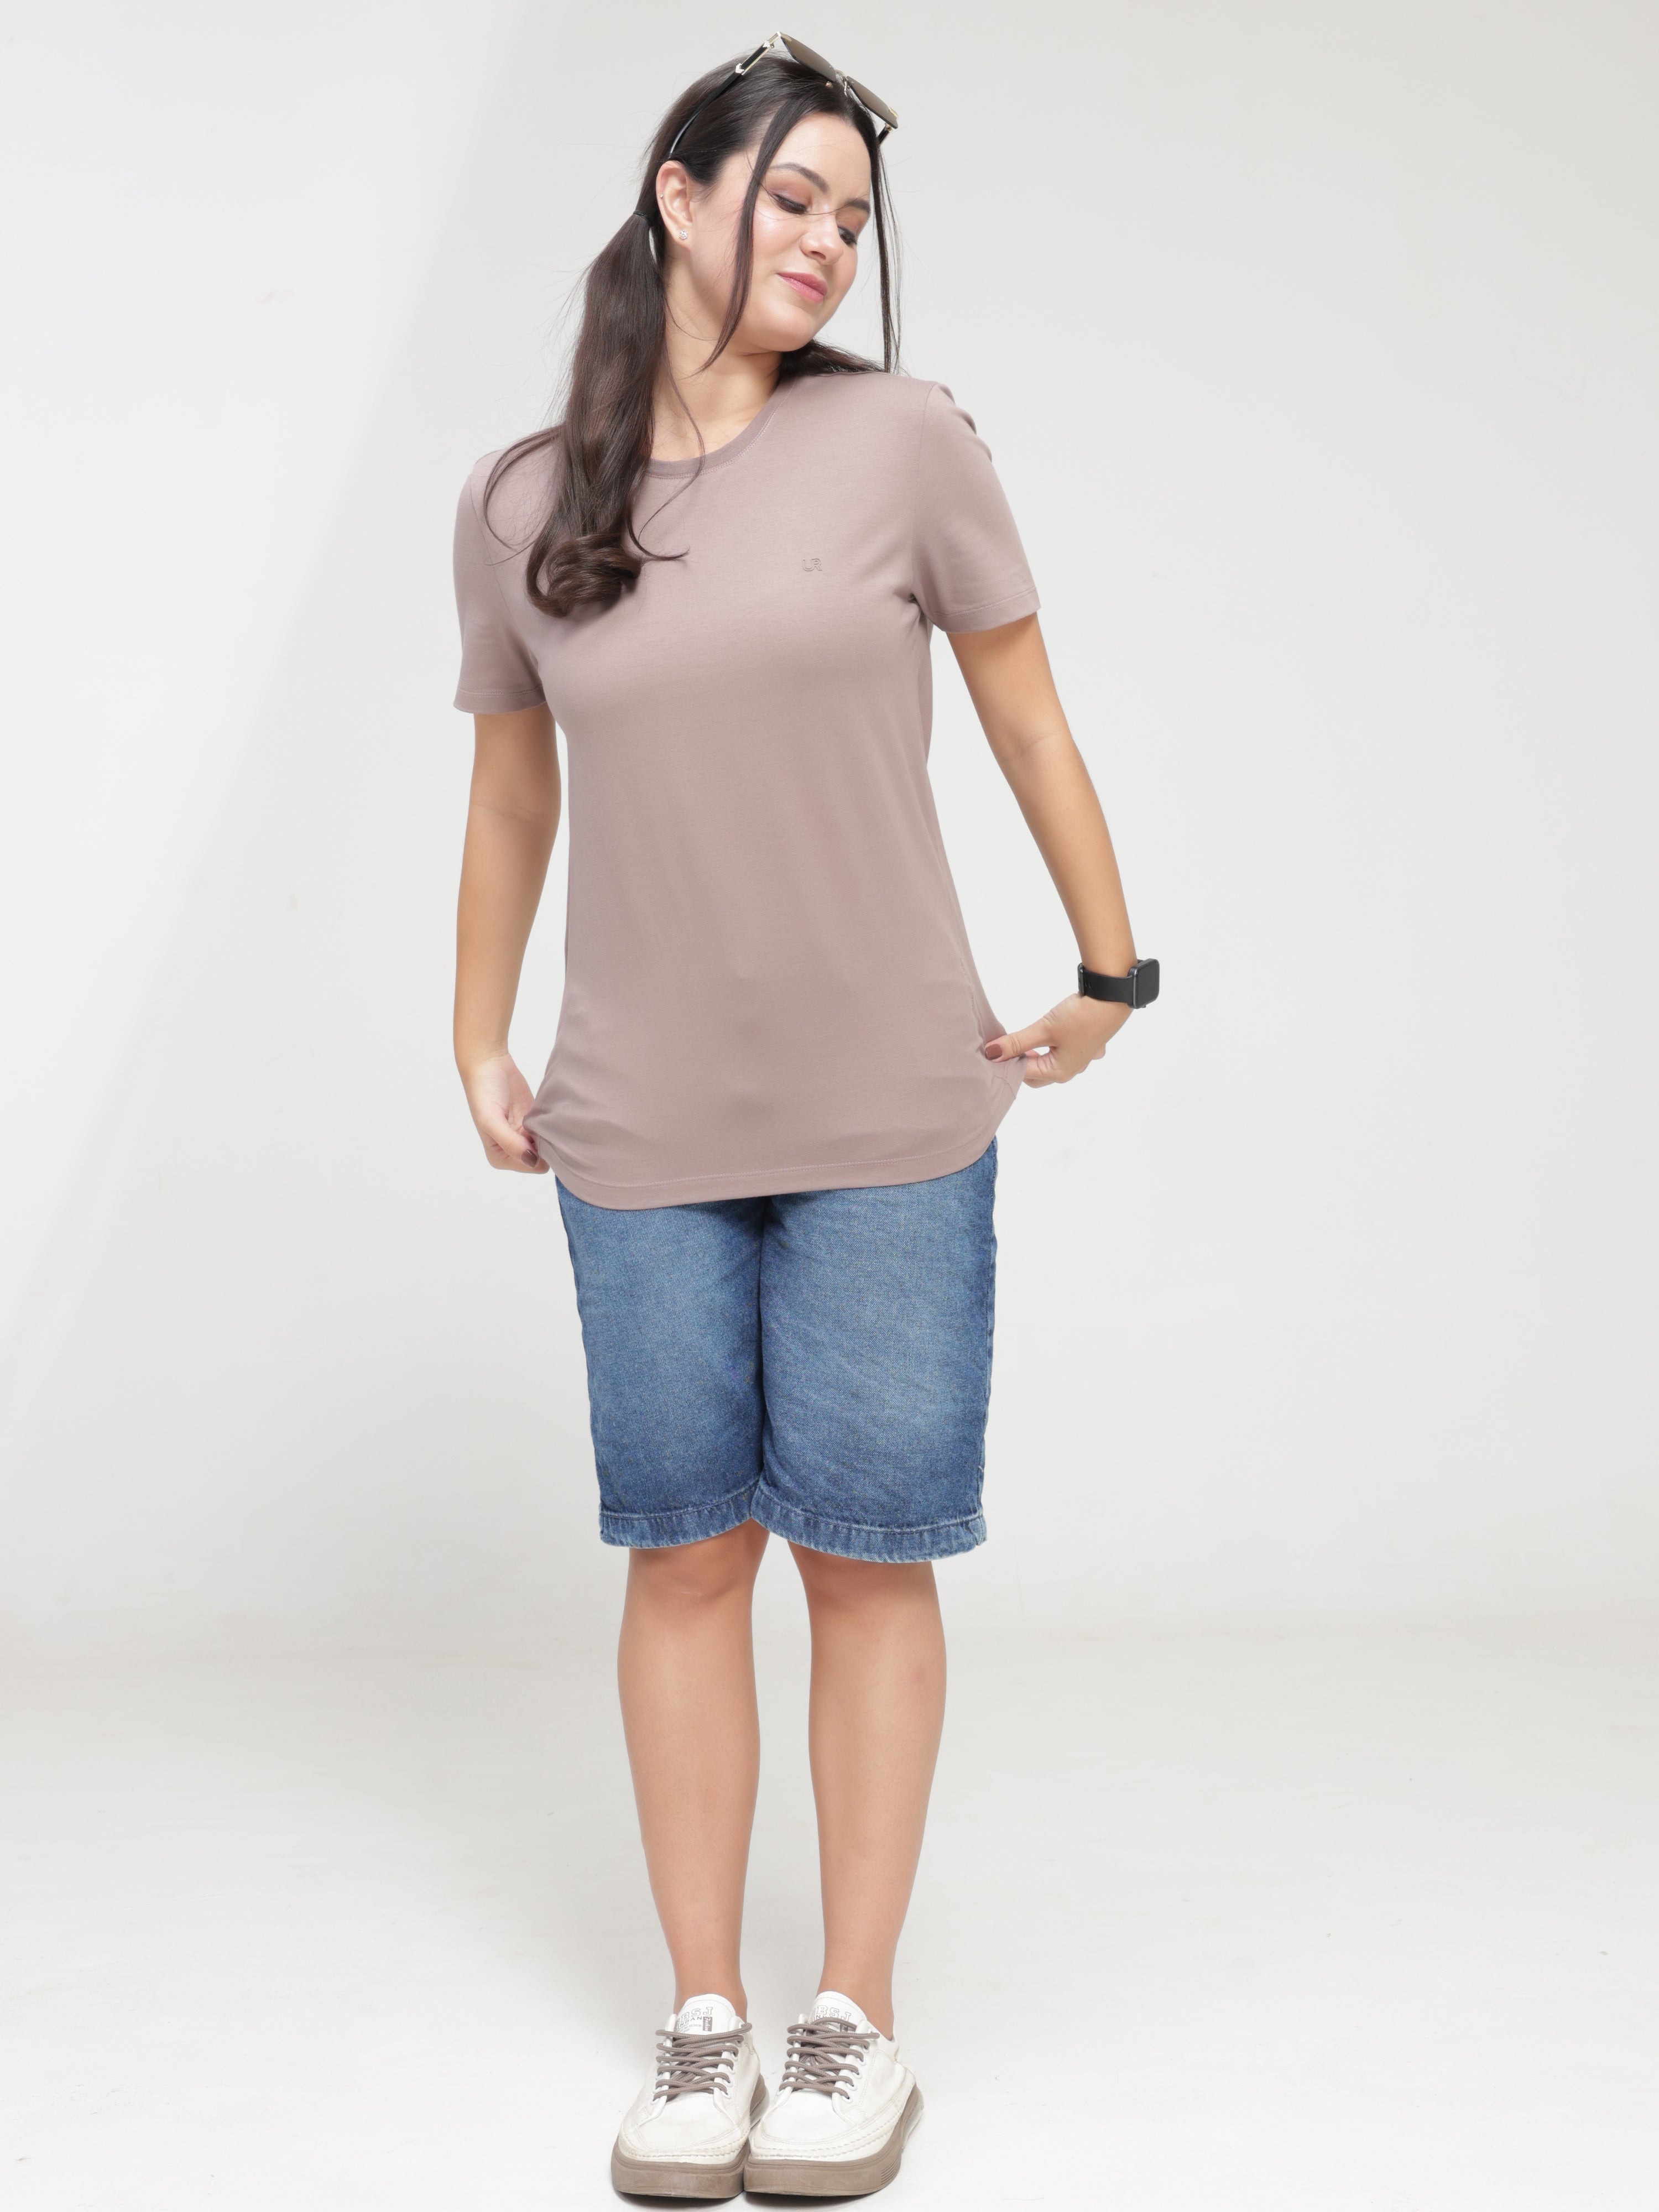 Woman wearing Dusky Maroon Turms T-shirt, anti-stain, anti-odor, stretchable, tailored fit, and intelligent apparel, paired with denim shorts.